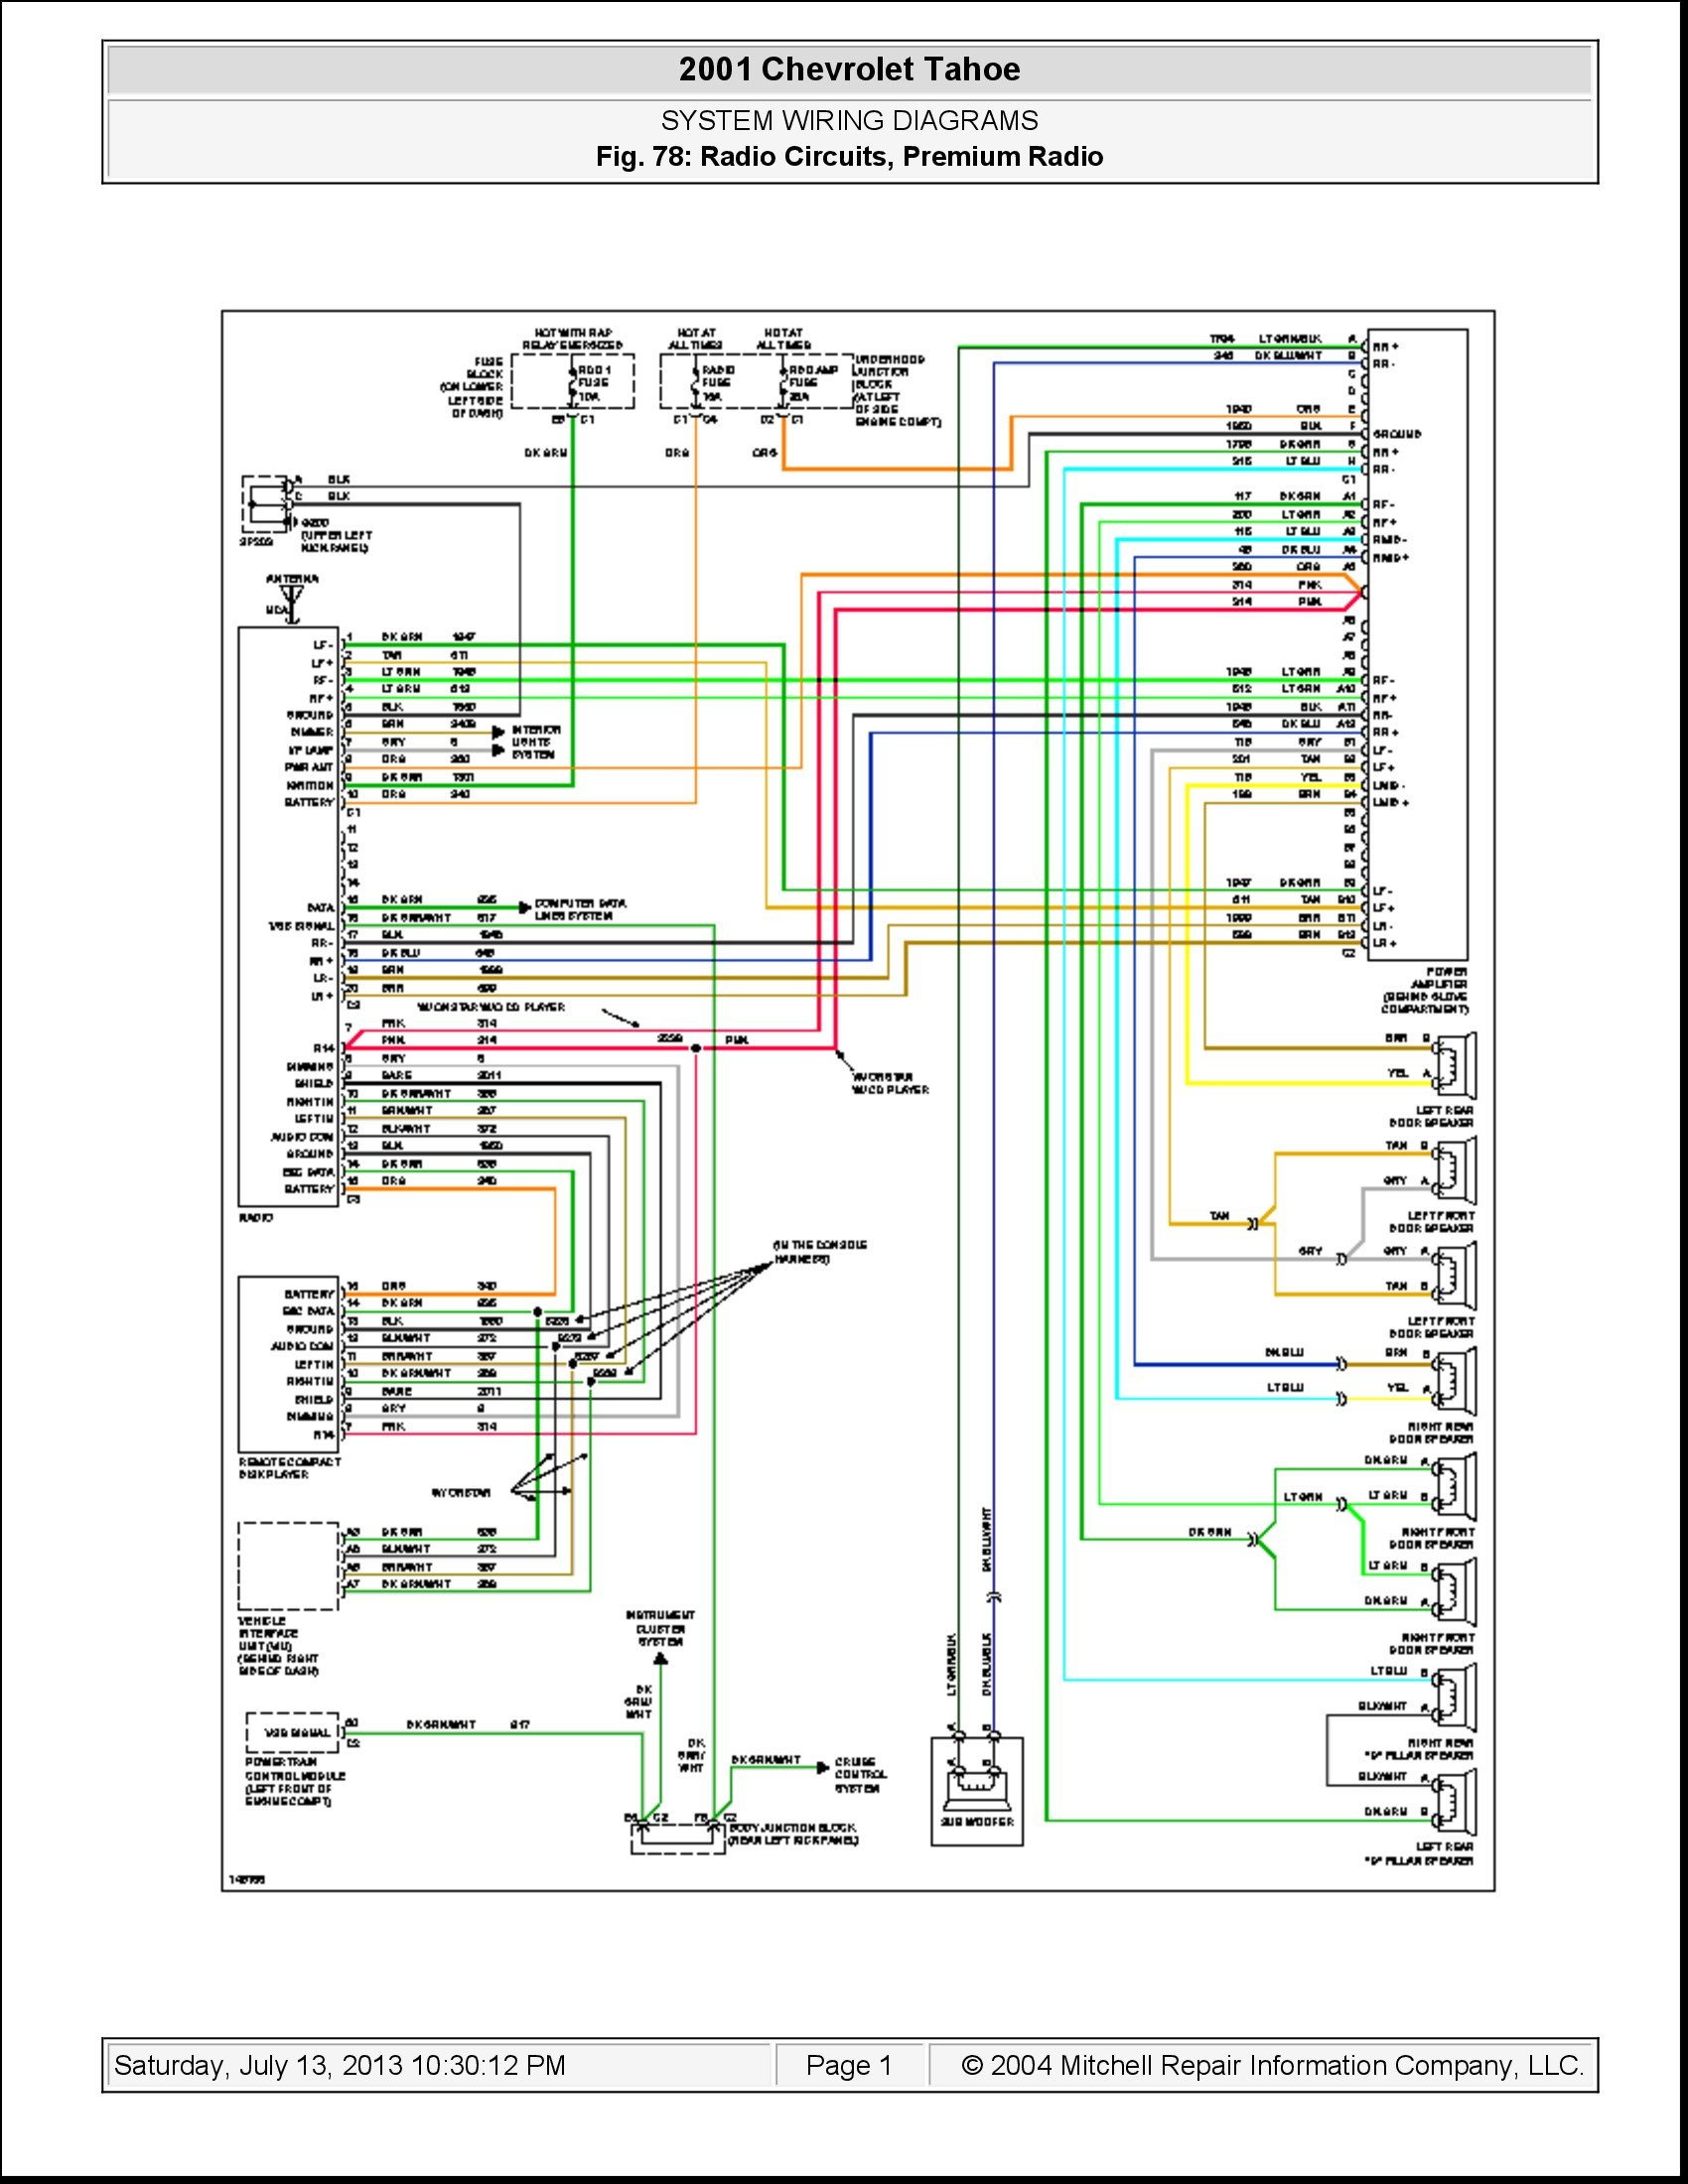 2013 Chevy Wiring Harness Diagram - All Wiring Diagram Data - Chevy Silverado Wiring Harness Diagram